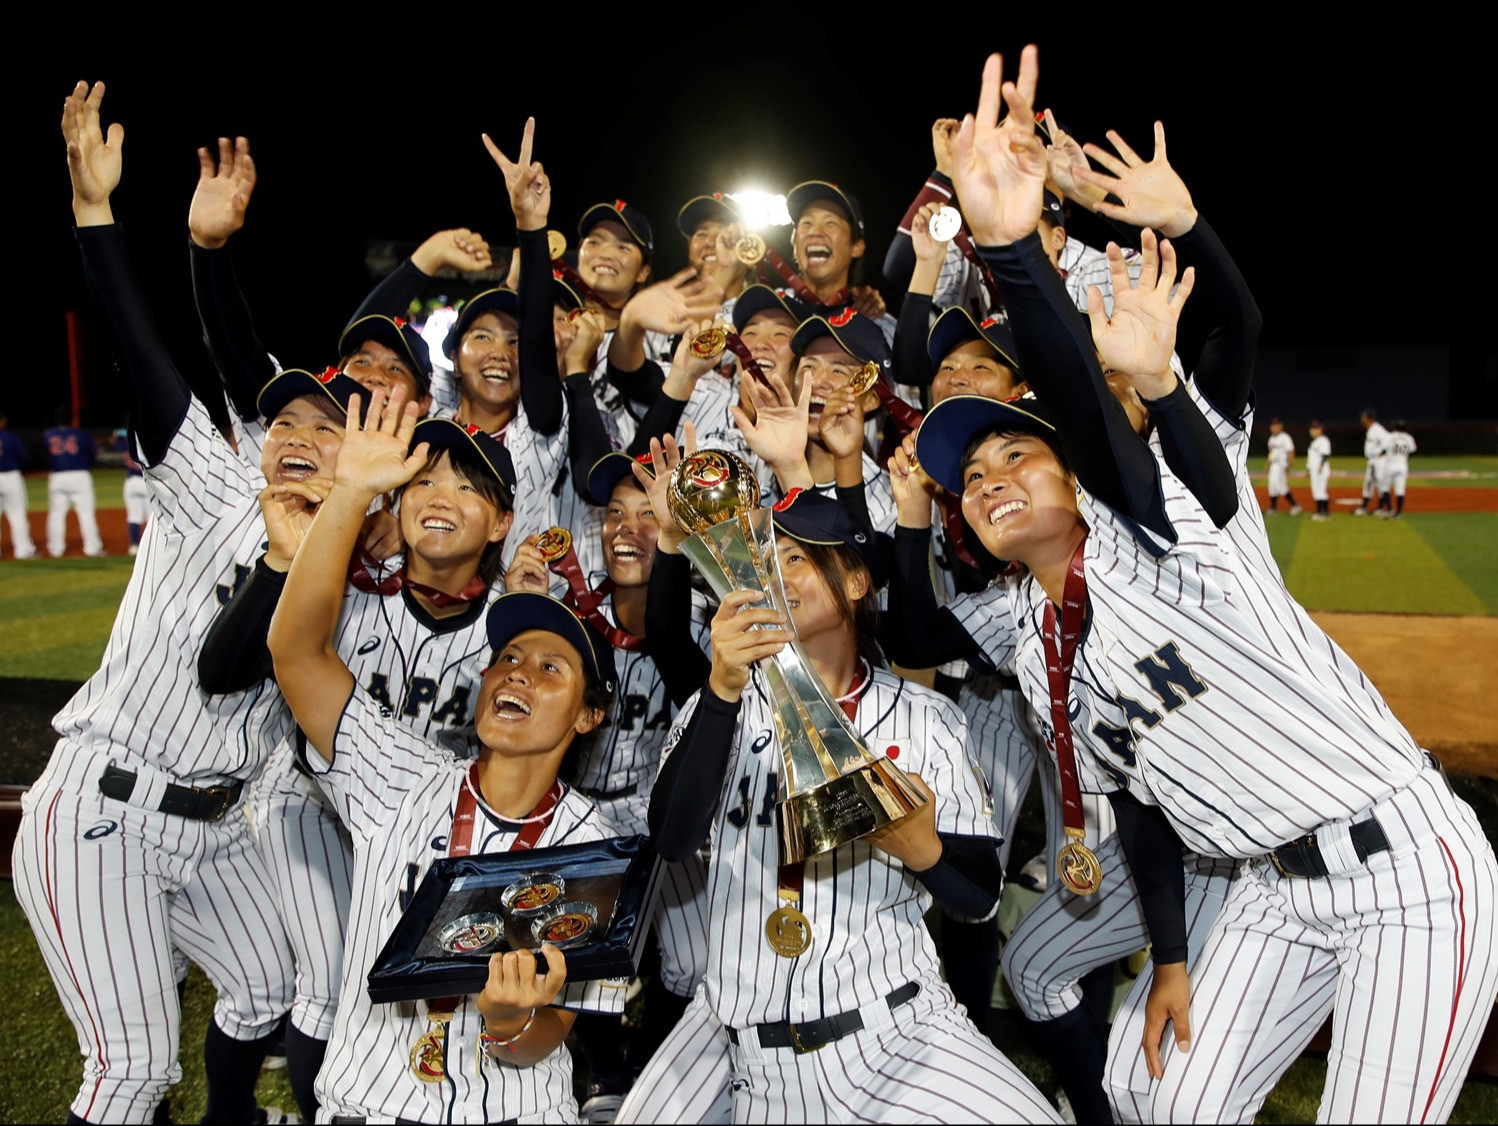 Sixtime champions Japan announce roster for Women's Baseball World Cup